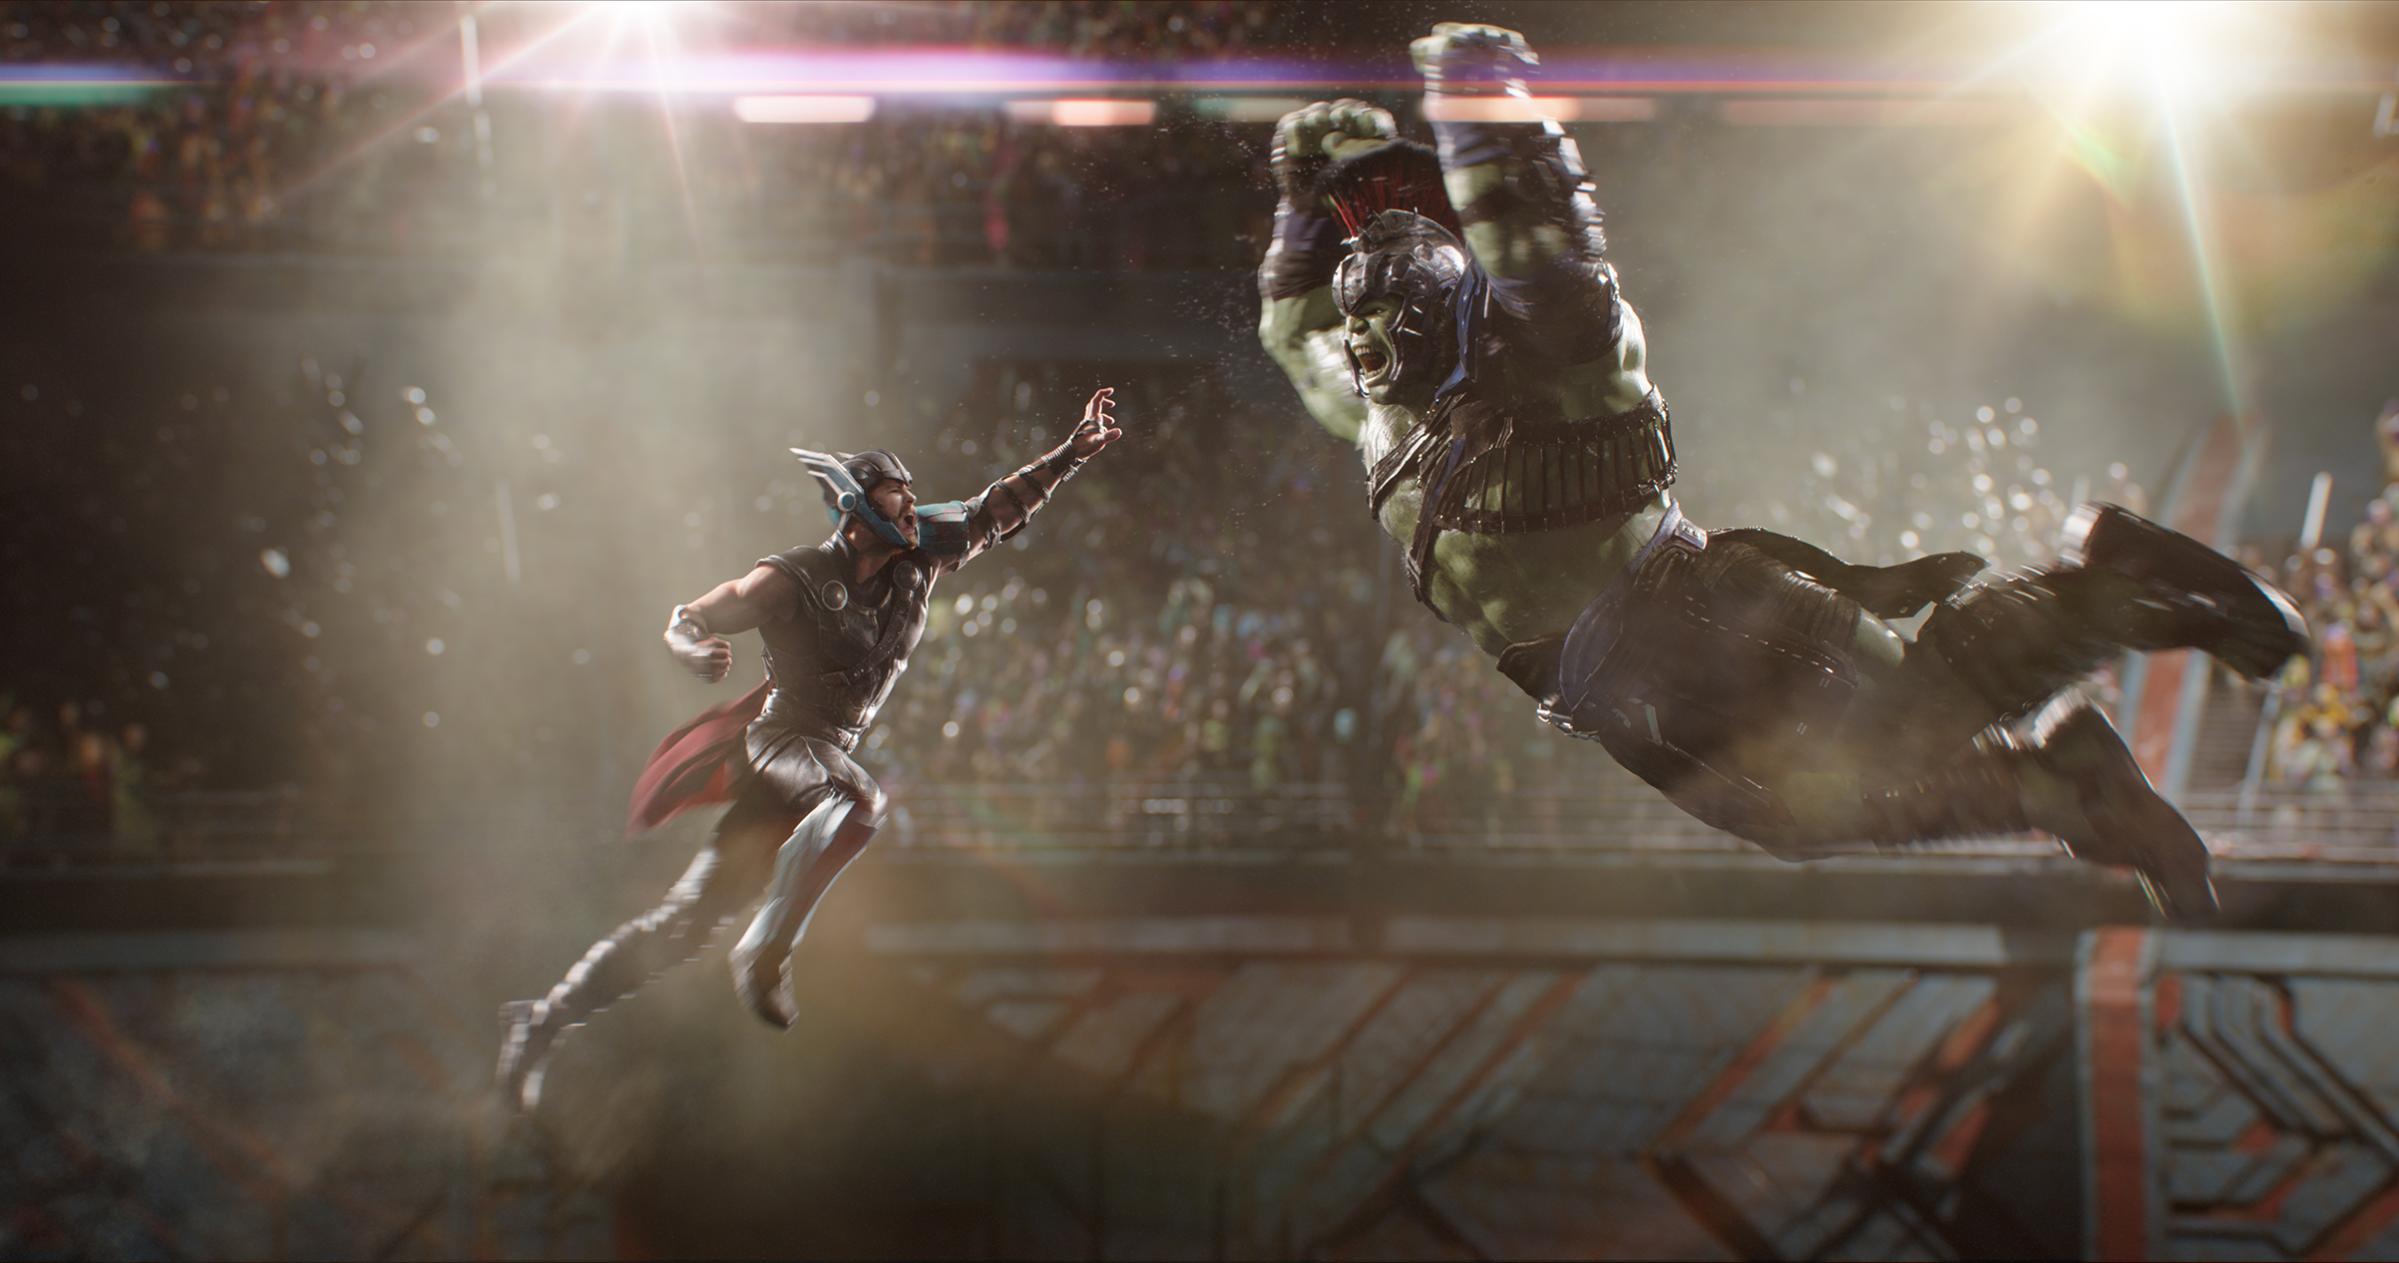 Thor (Hemsworth)and the Hulk (Ruffalo)finally answer the question